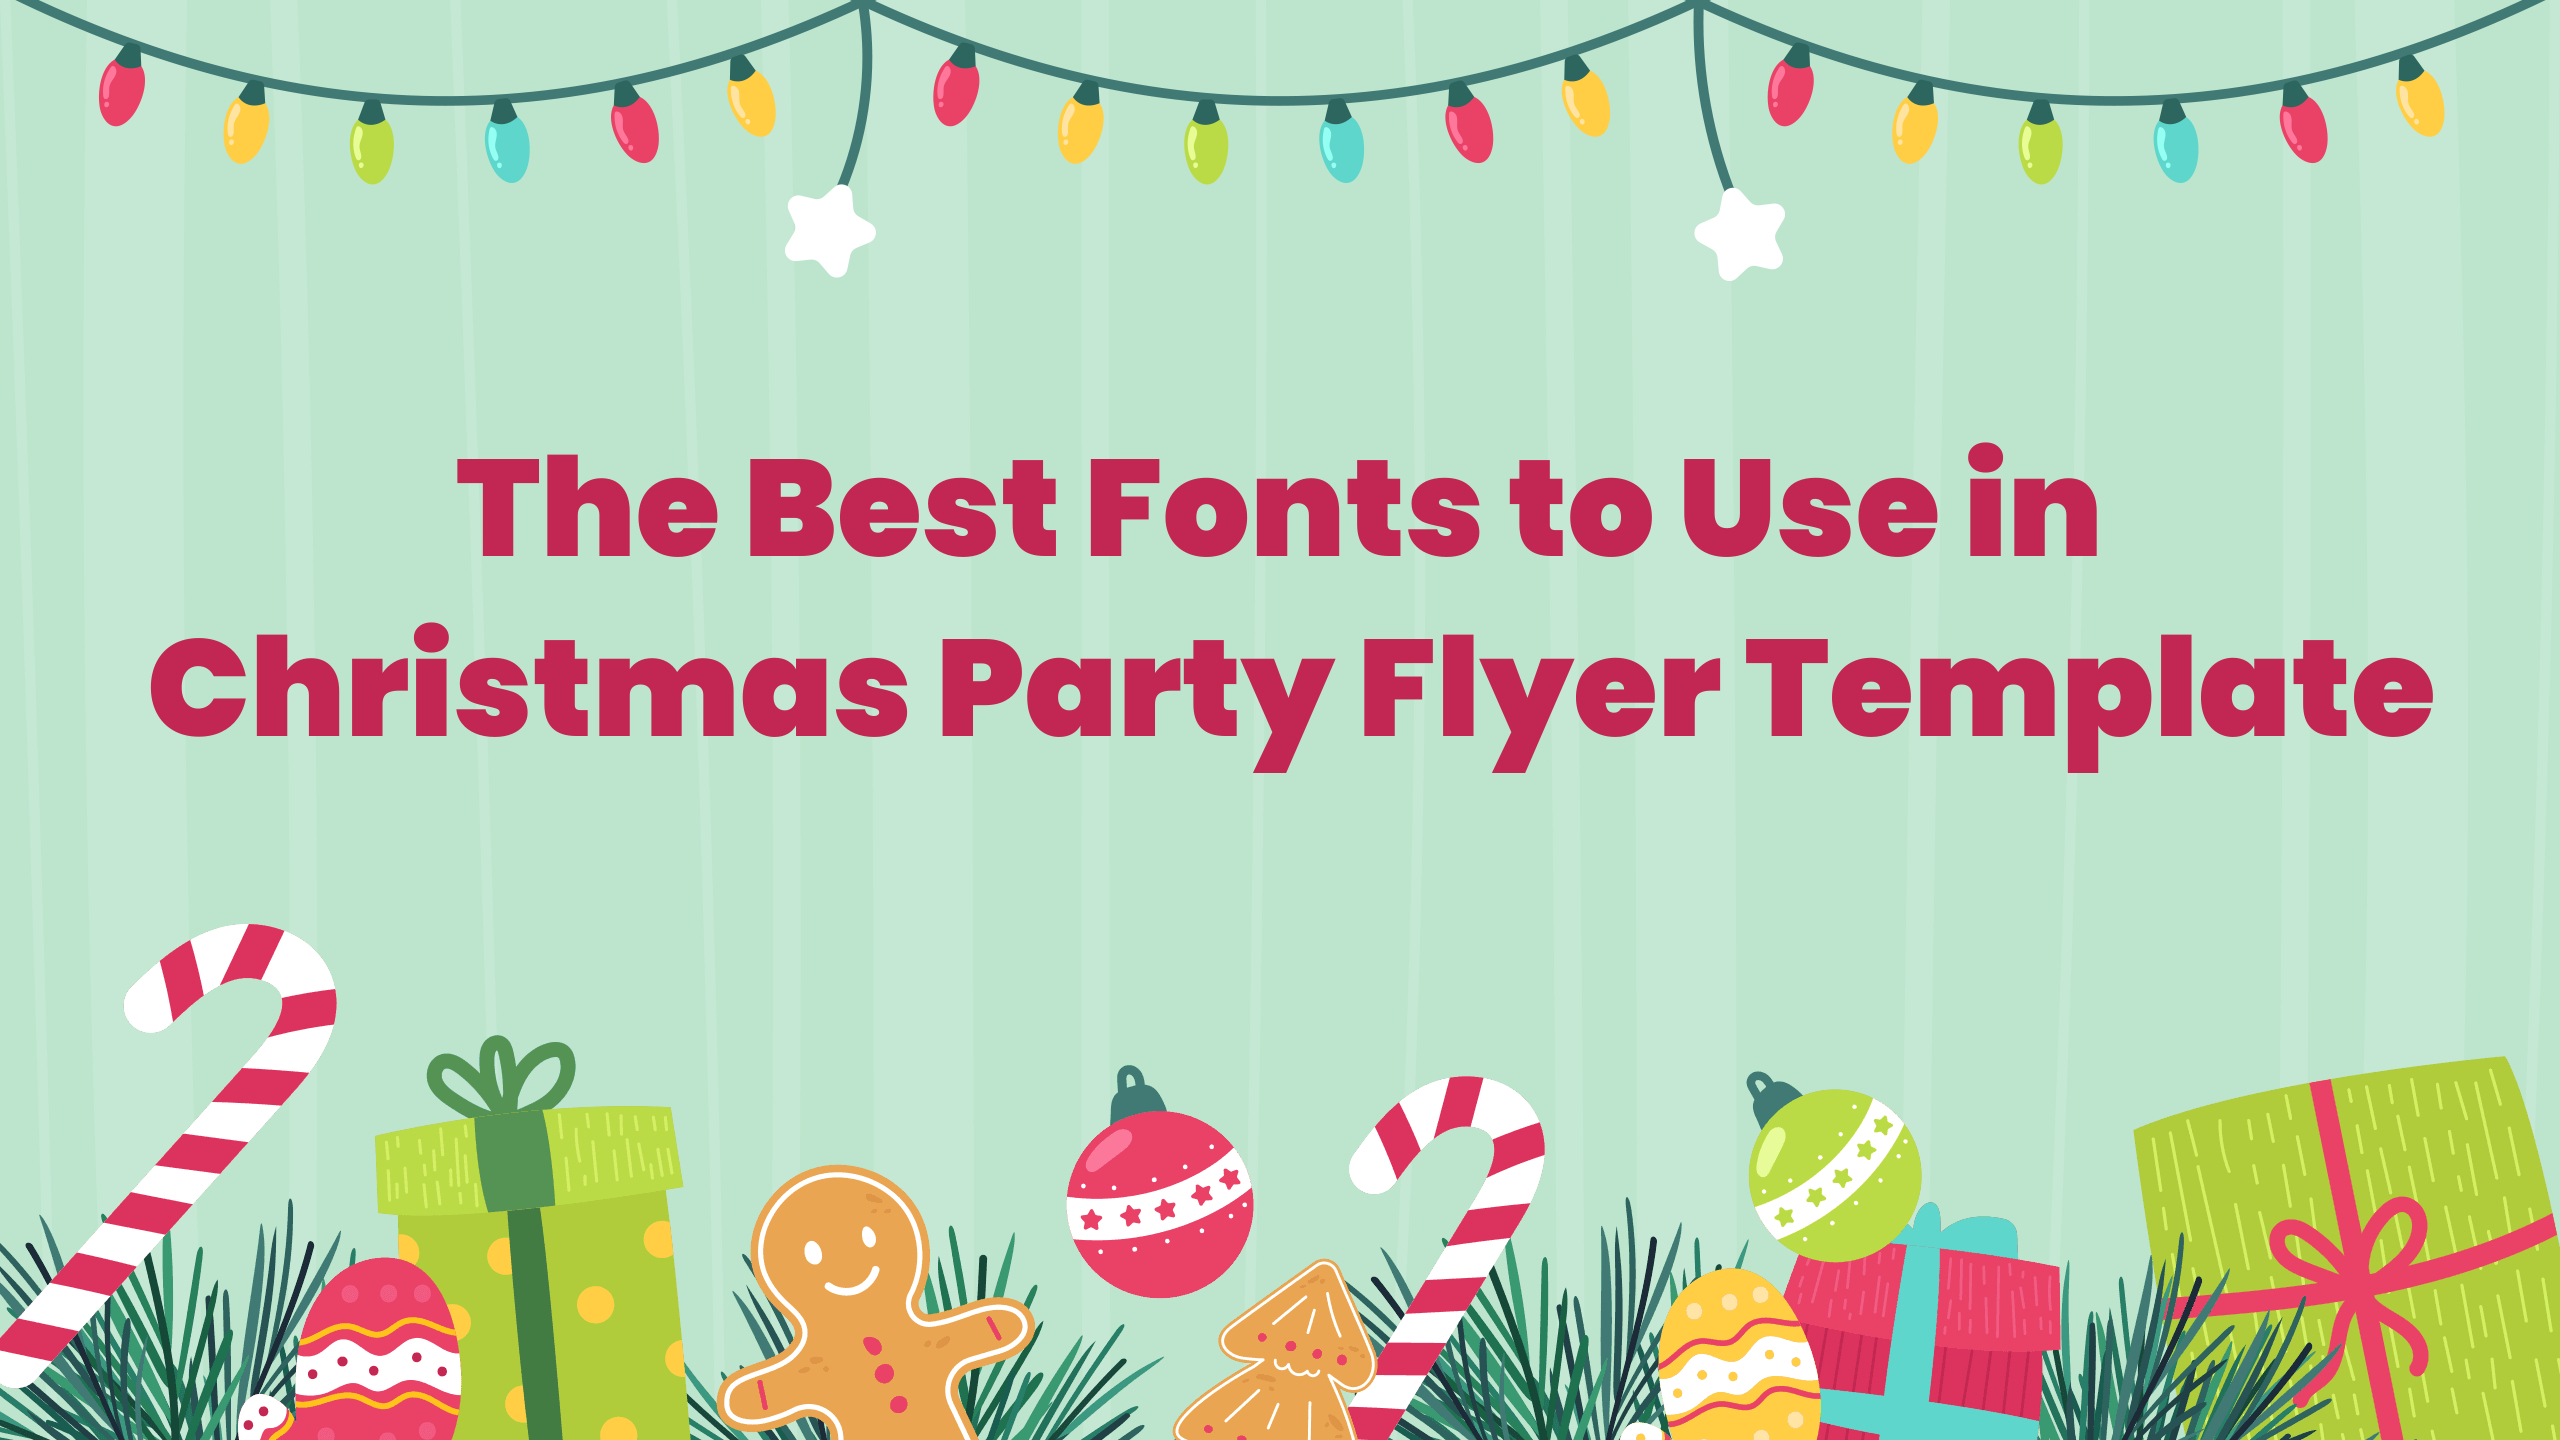 The Best Fonts to Use in Christmas Party Flyer Template